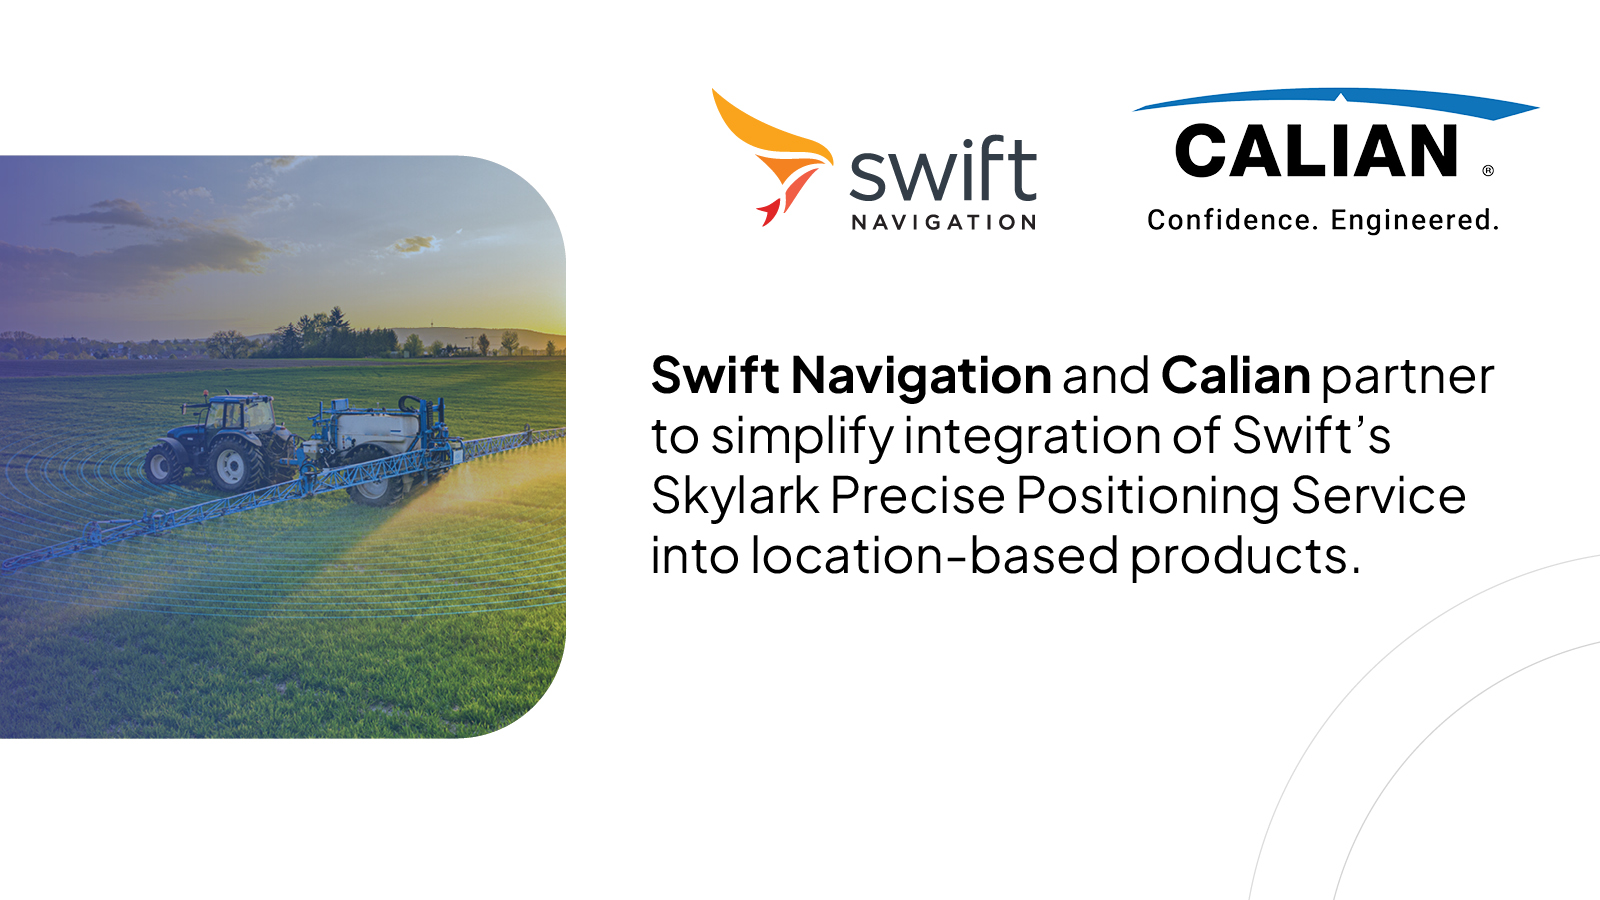 Swift Navigation and Calian Partner to Simplify Integration of Swift’s Precise Positioning Service into Location-Based Products